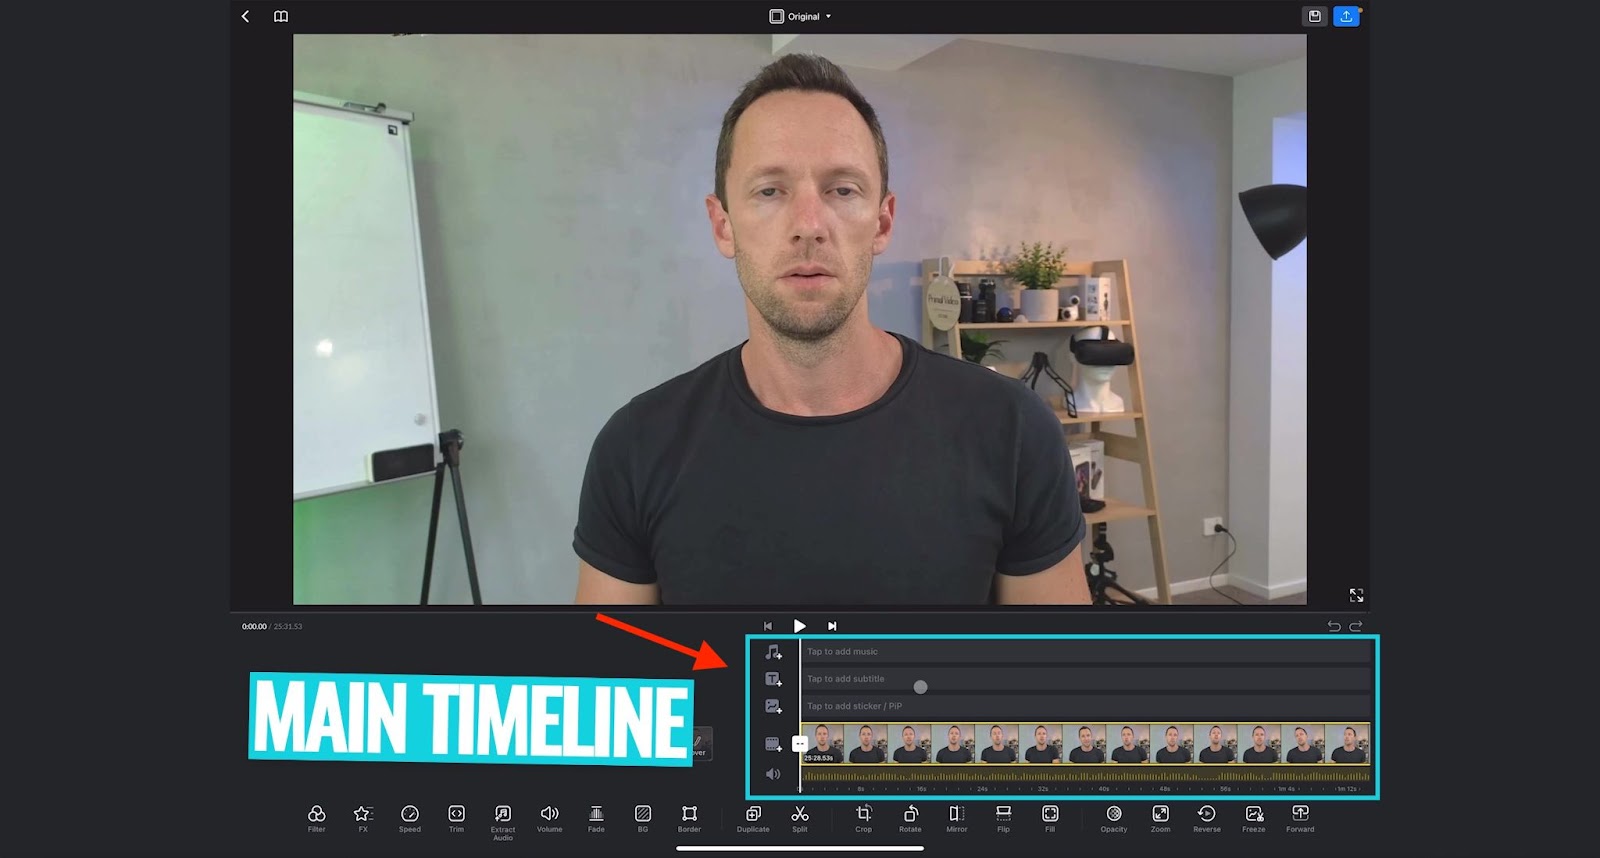 VN Video Editor Interface with the editing timeline highlighted in a box and the 'MAIN TIMELINE' text next to it on the left